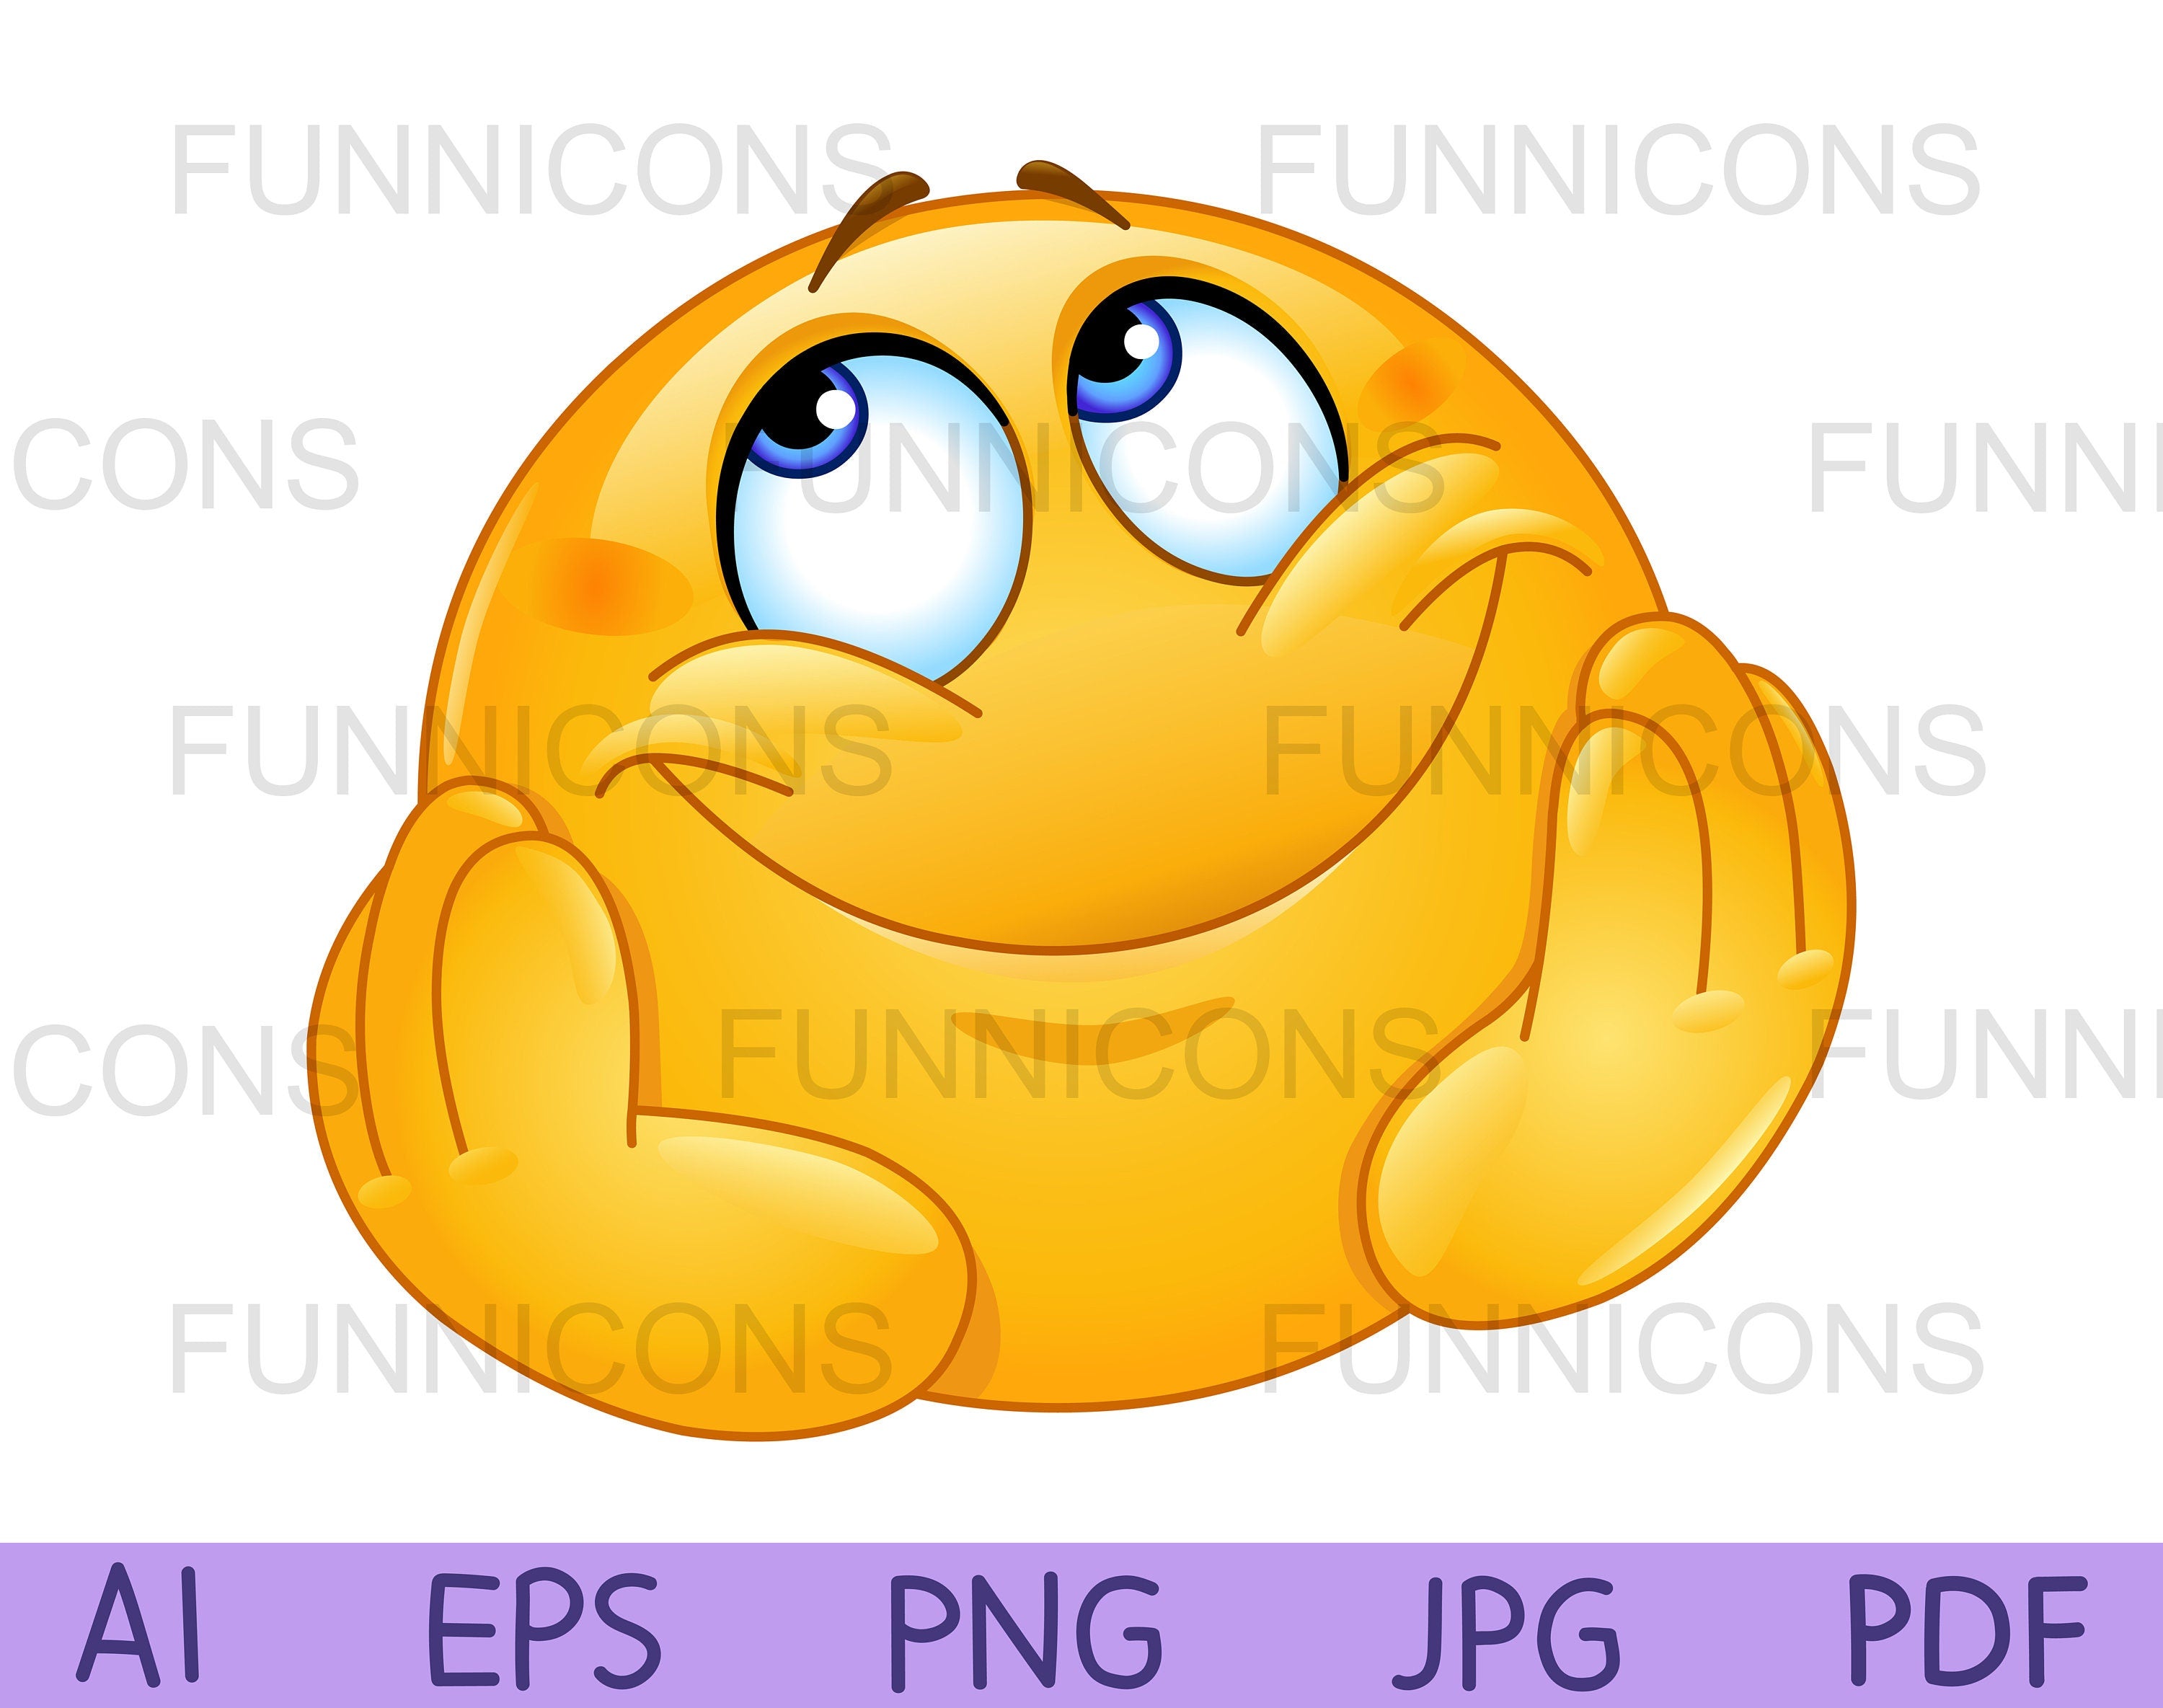 smiley face emoticons clipart